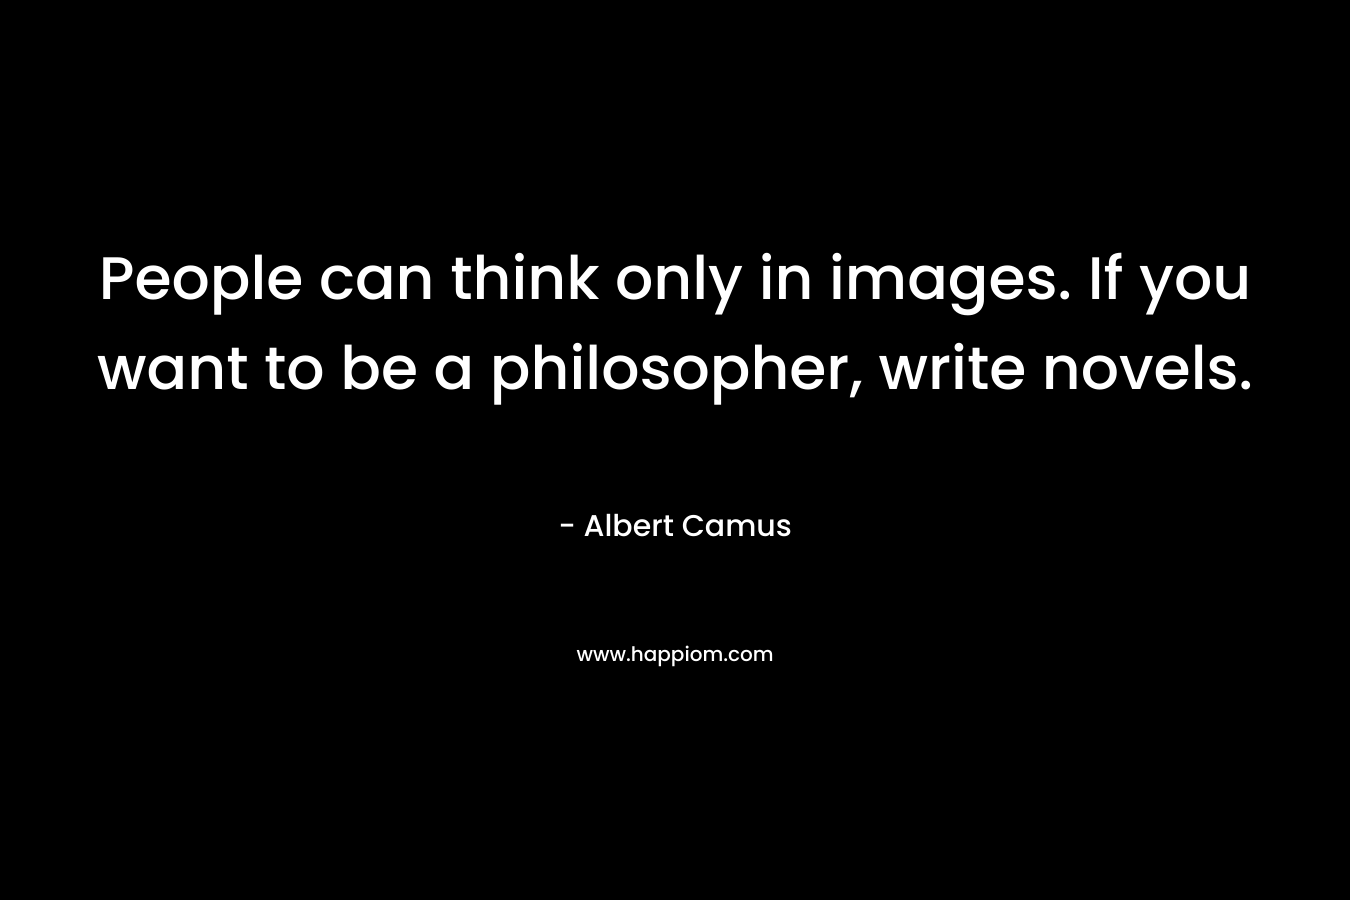 People can think only in images. If you want to be a philosopher, write novels. – Albert Camus